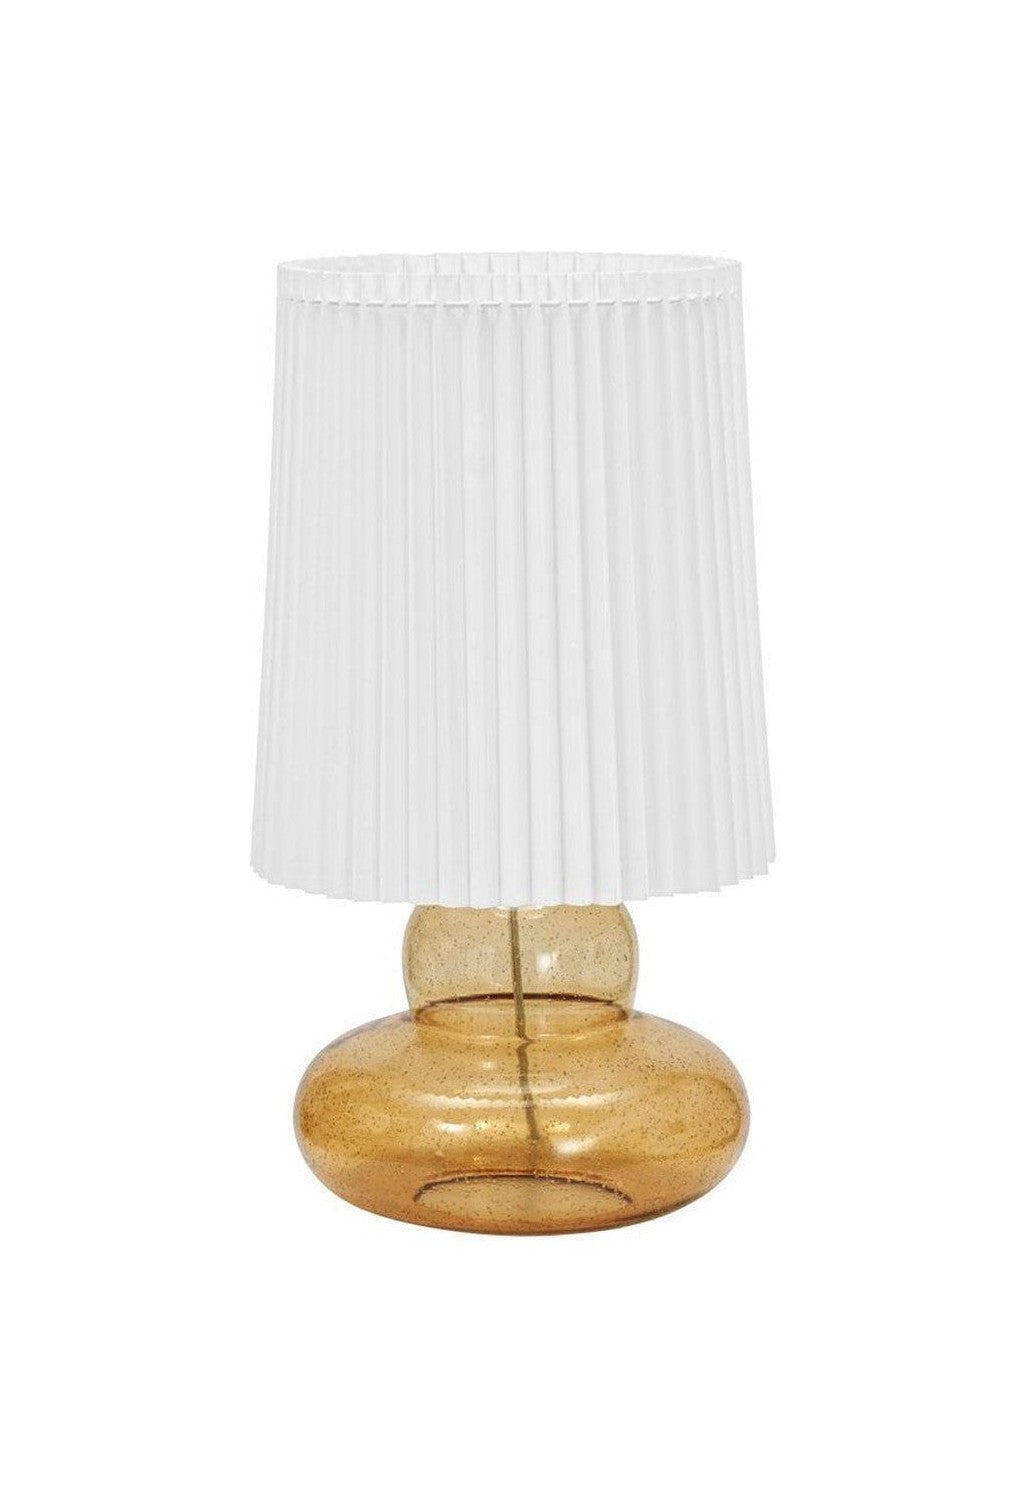 House Doctor Table lamp incl. lampshade, HDRibe, Amber